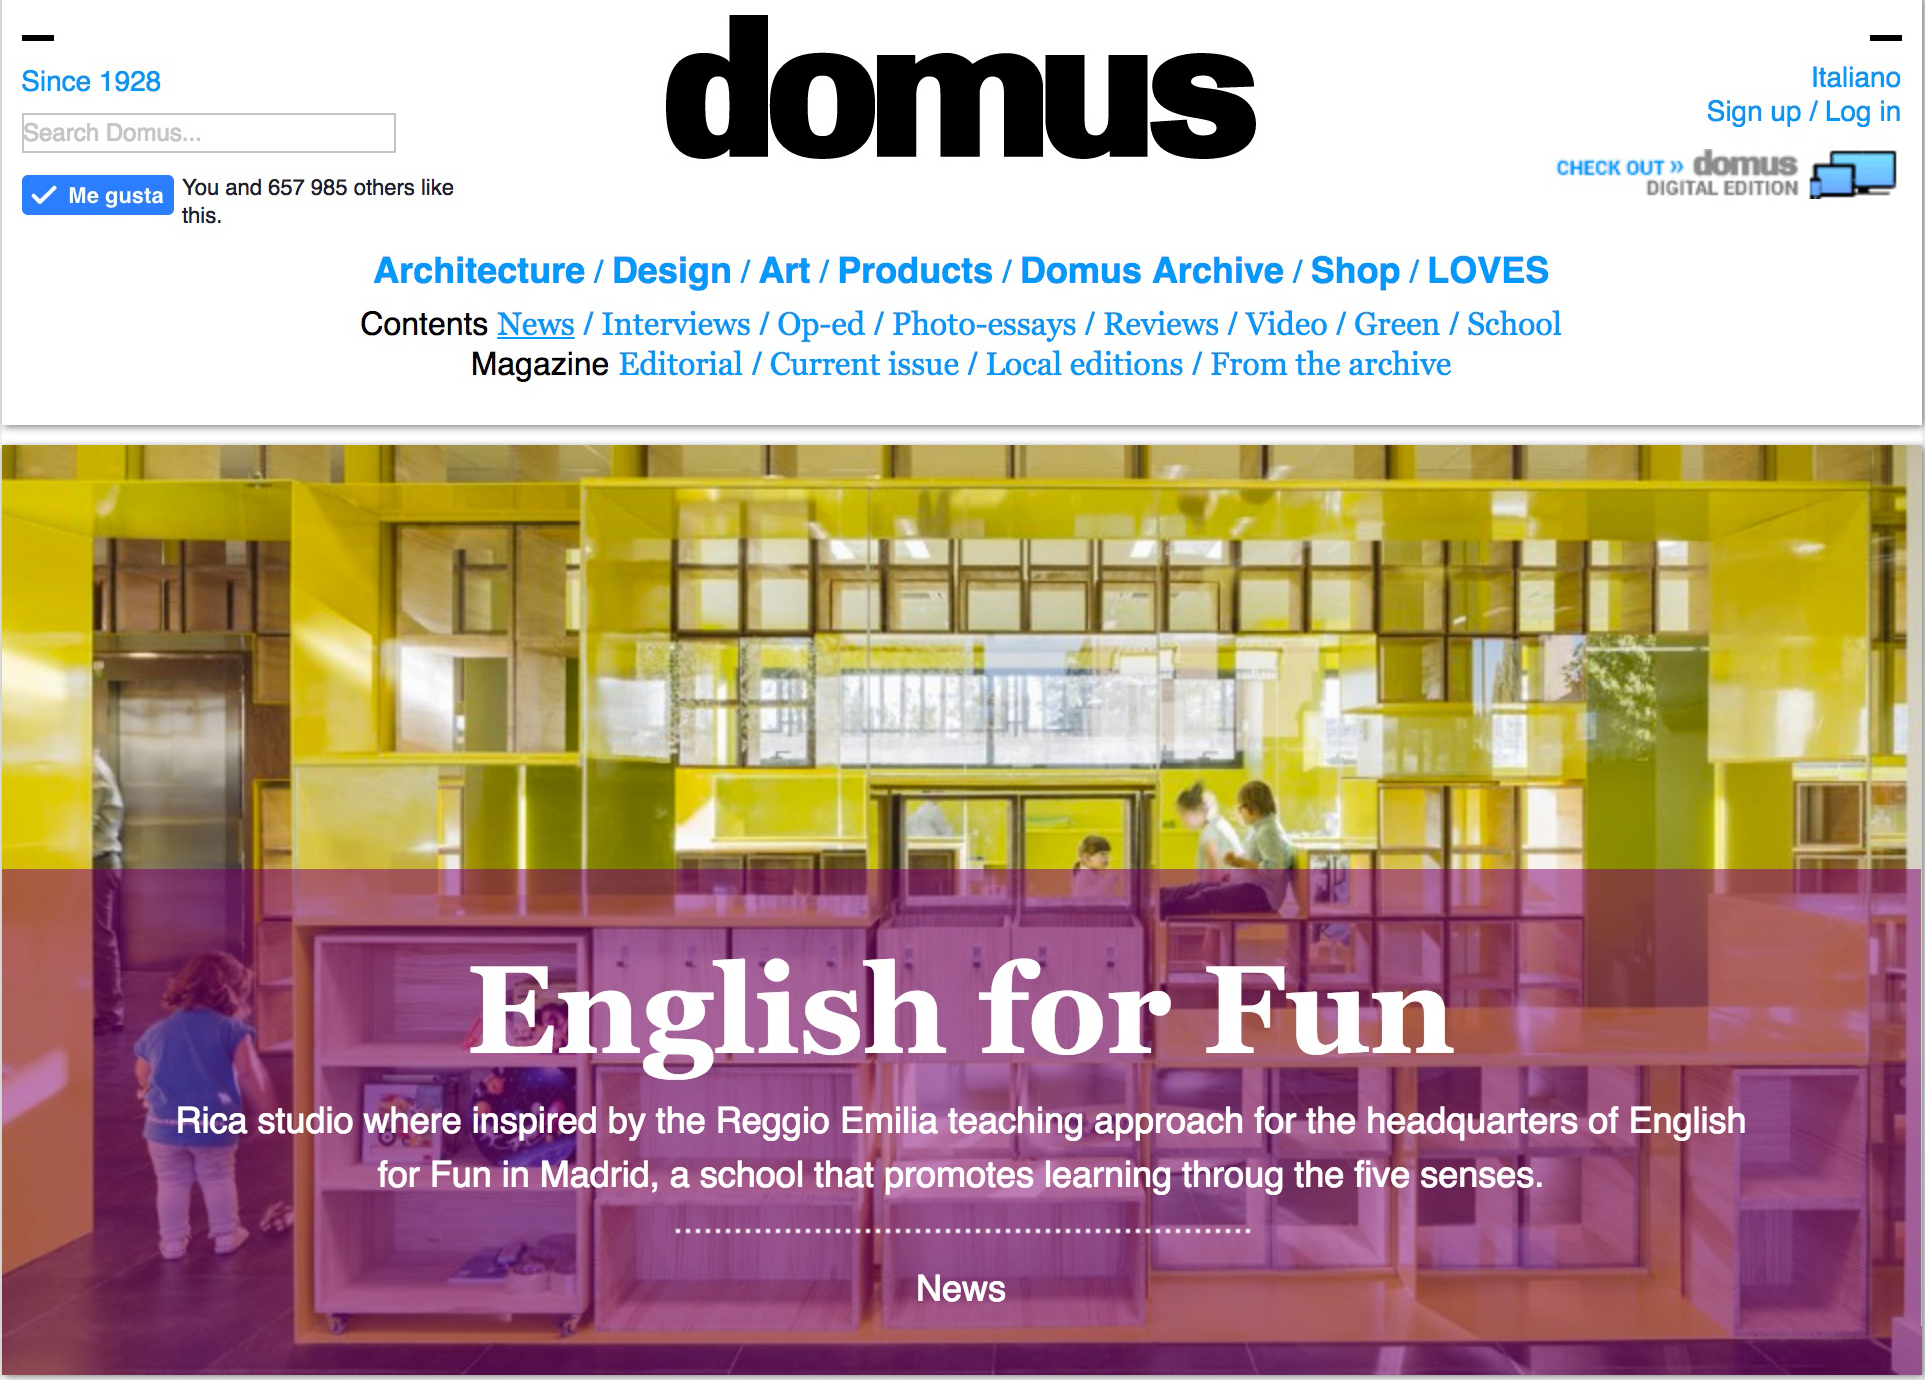 This time our project for a kindergarden ¨English for fun¨ published in Domus web